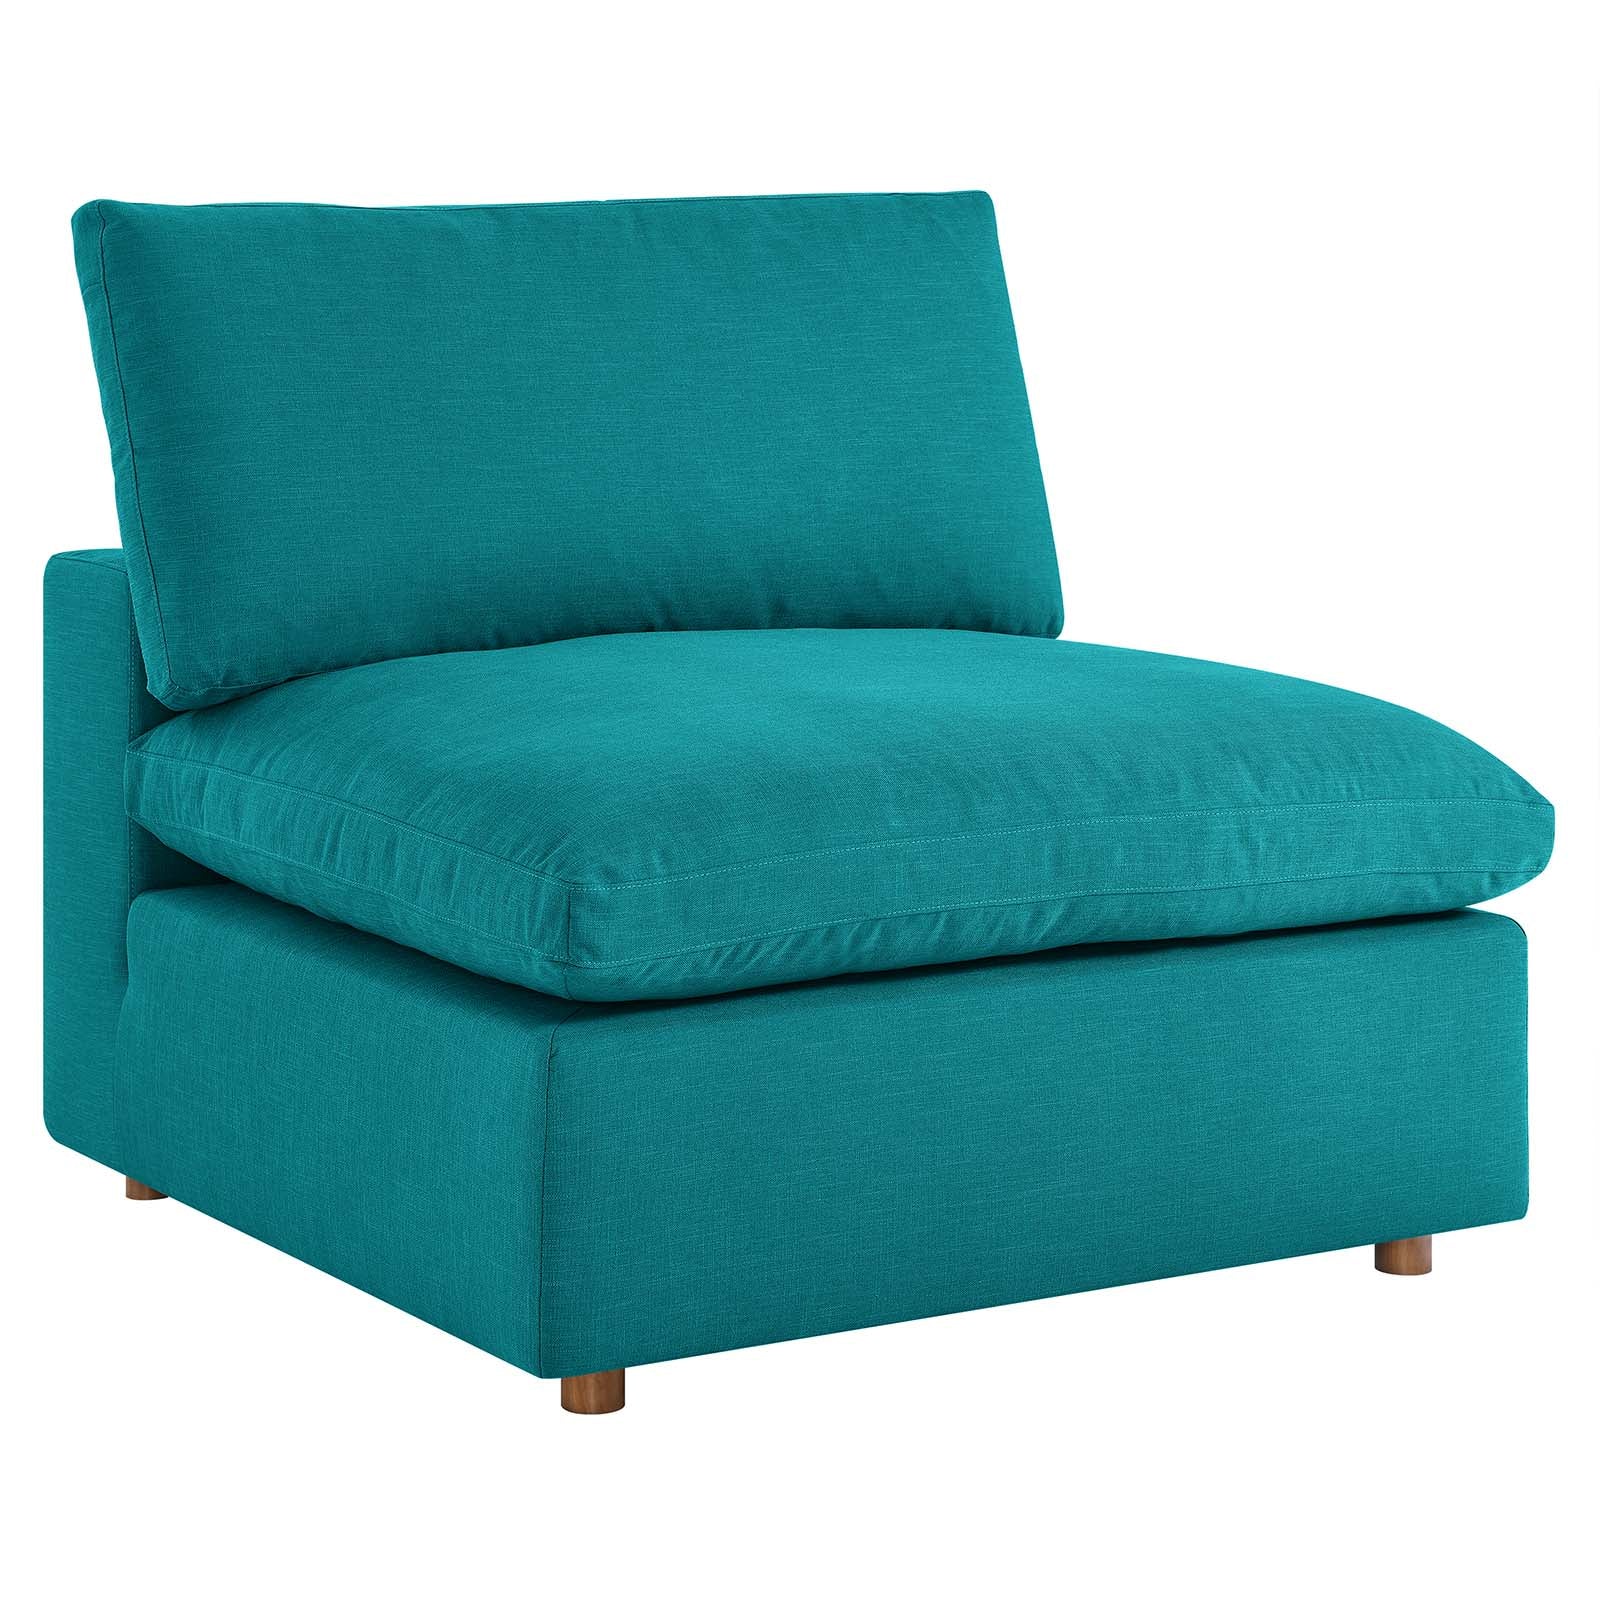 Modway Sectional Sofas - Commix Down Filled Overstuffed 3 Piece Sectional Sofa Set Teal